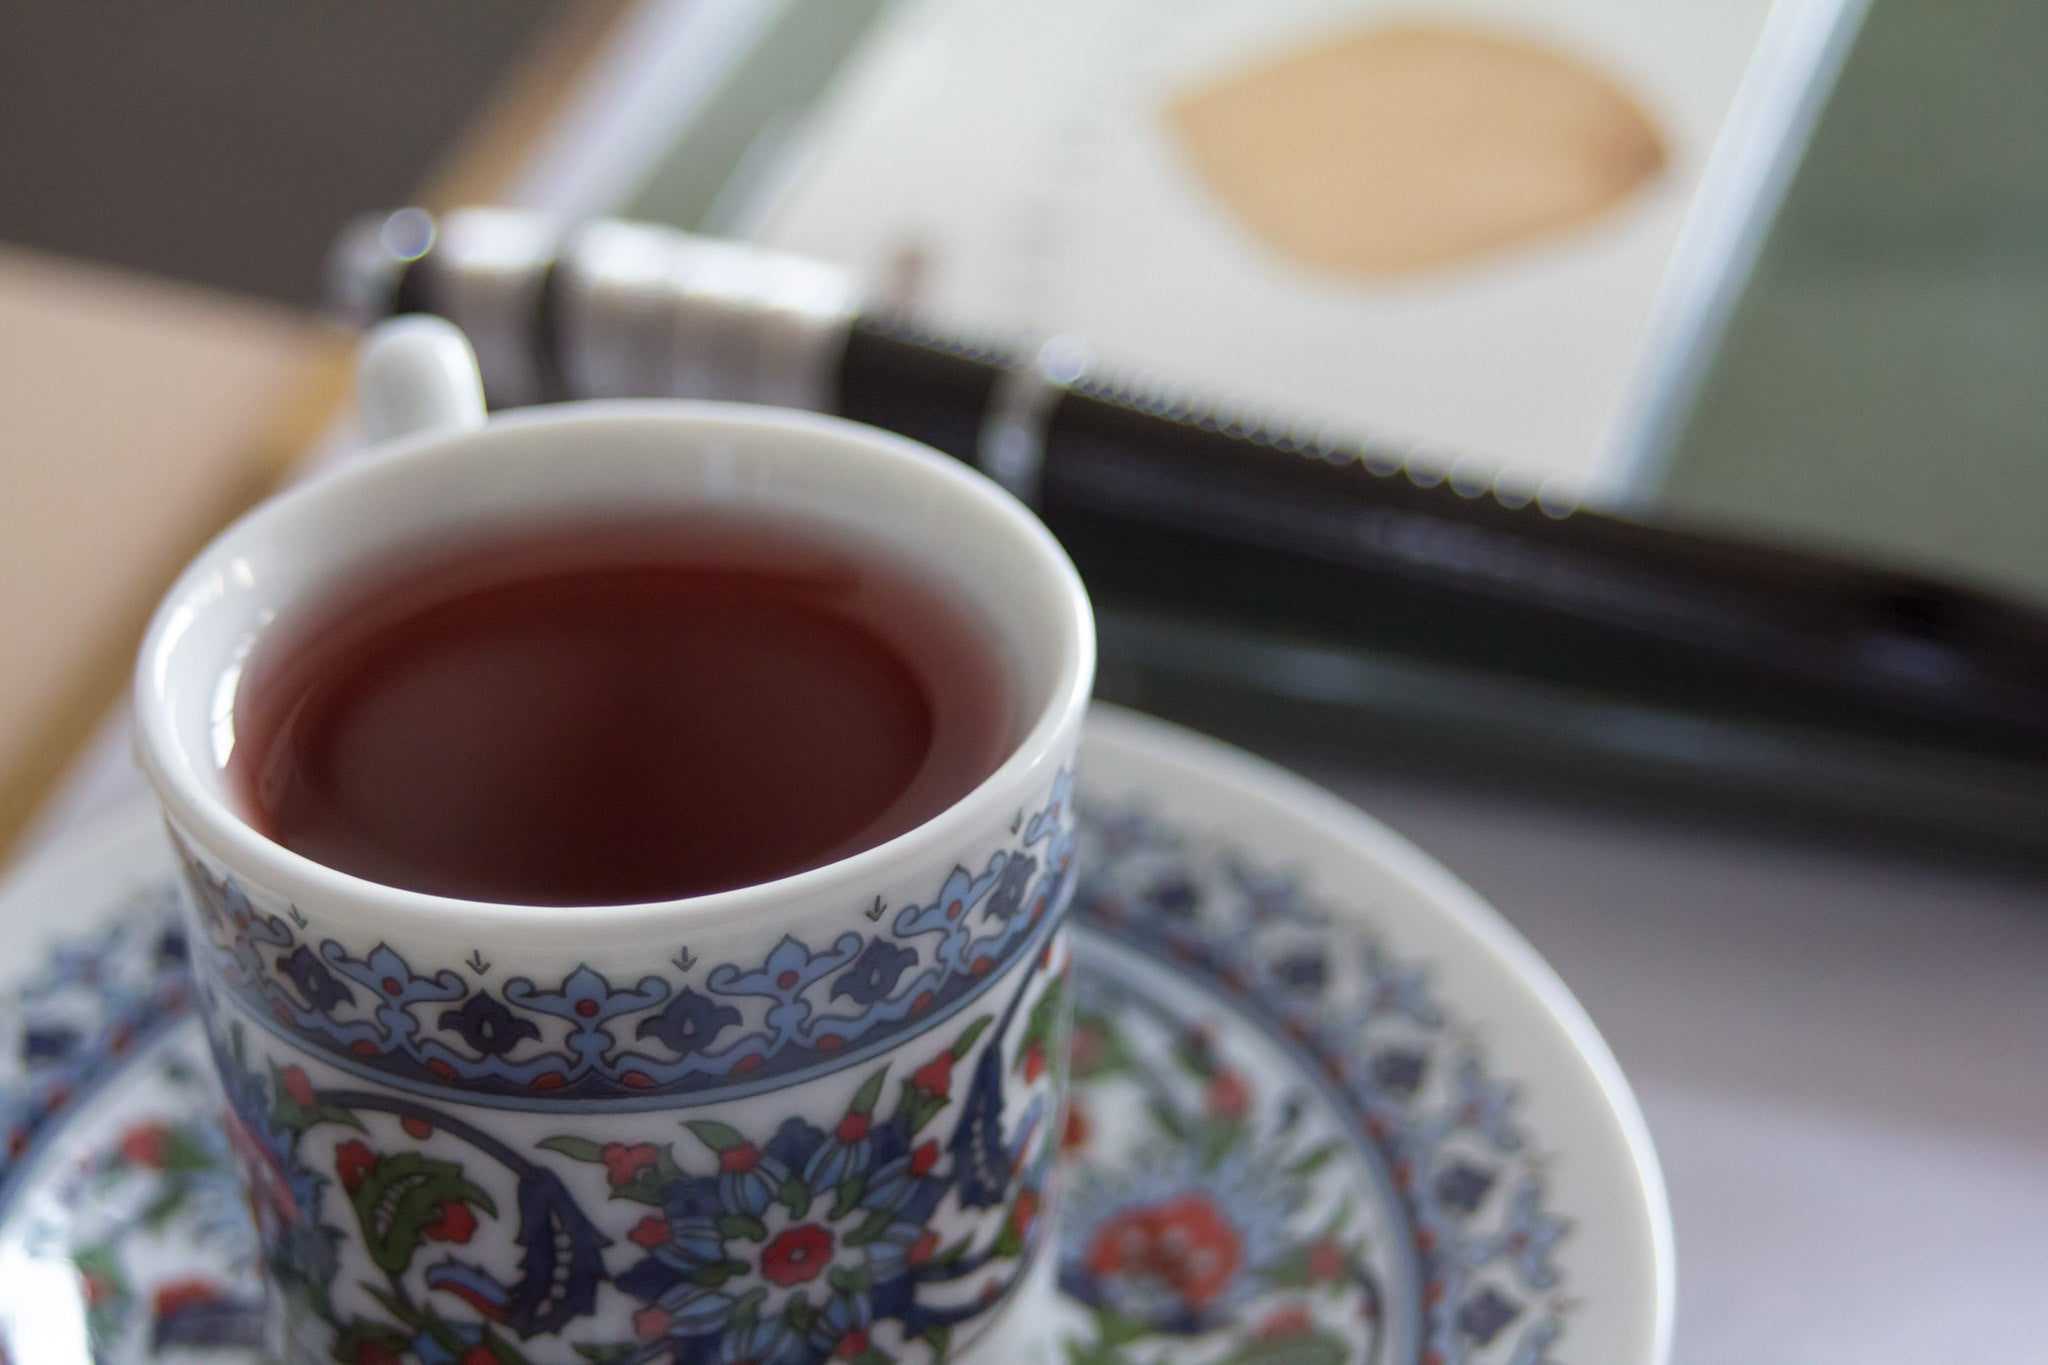 How The Wrong Teacup Can Ruin Your Tea